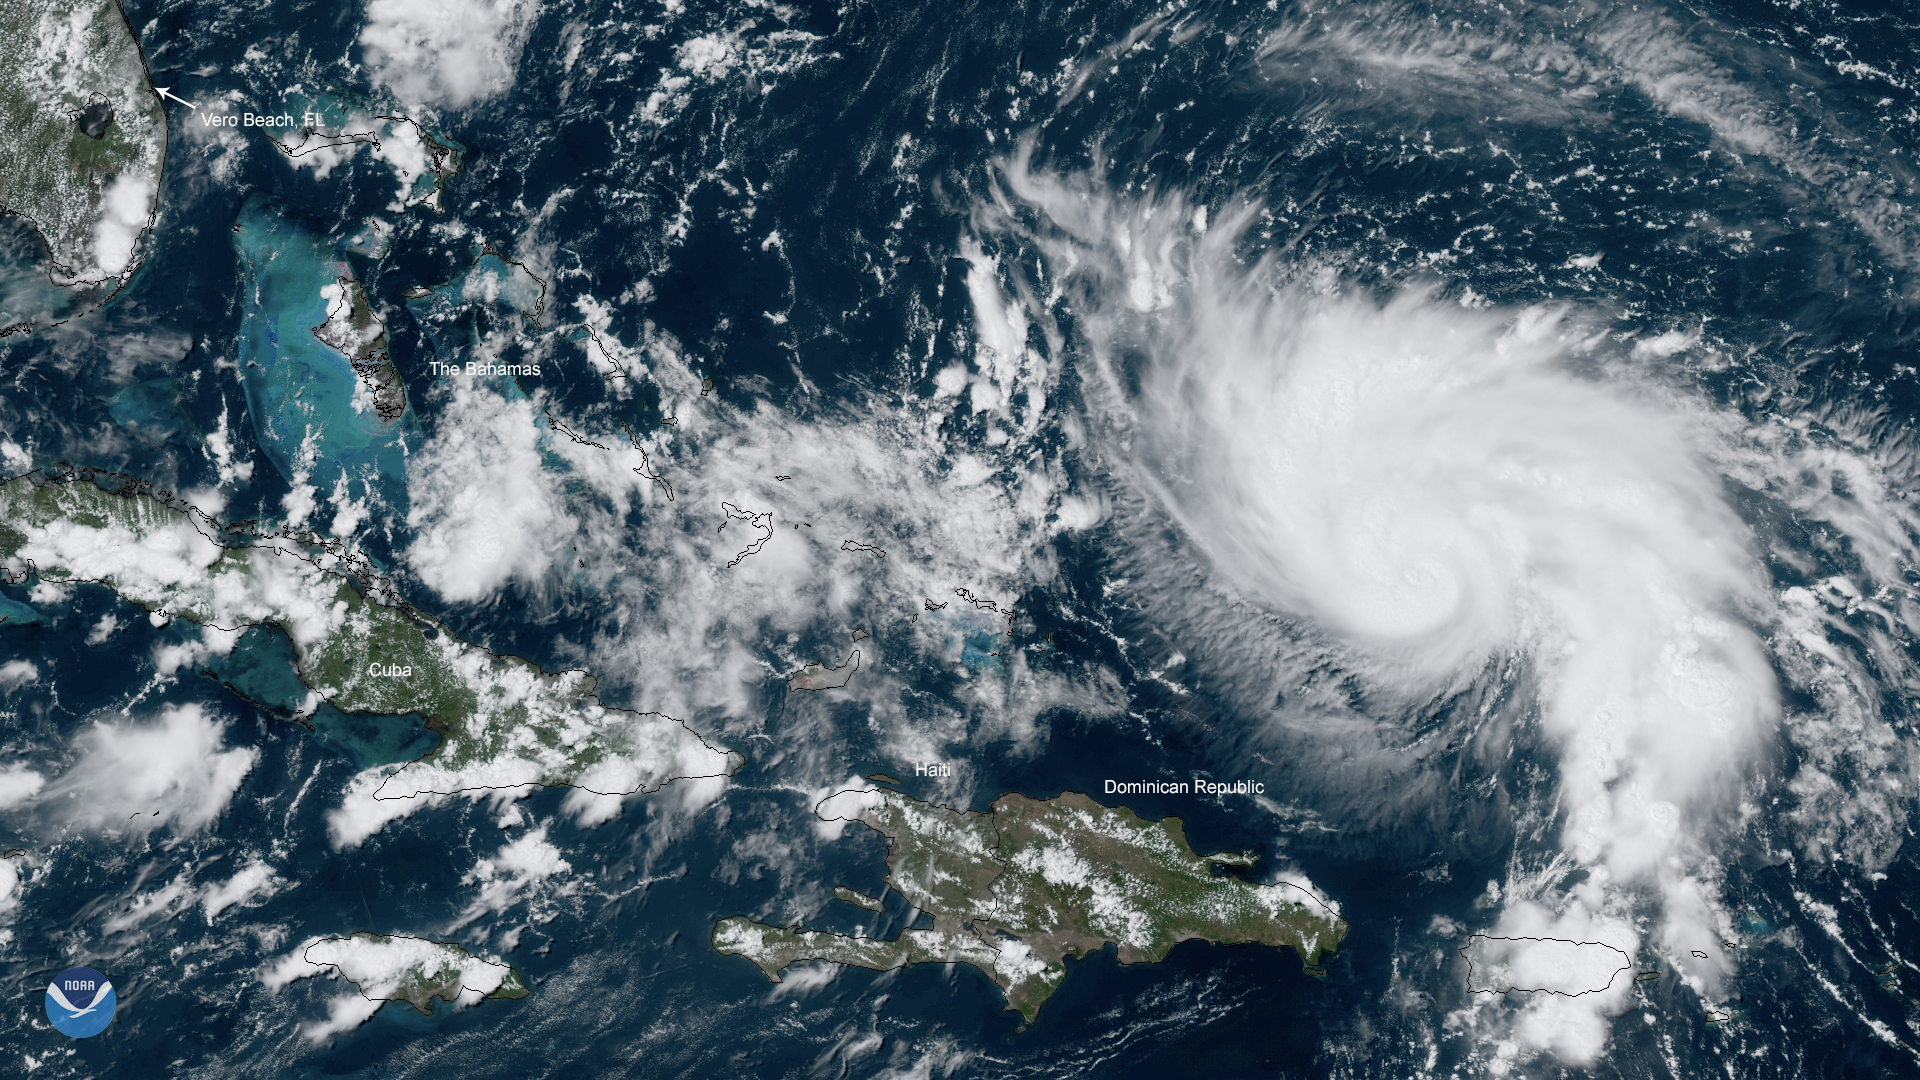 A satellite image of Hurricane Dorian, which is expected to cause tropical-storm-force winds in Florida over the weekend